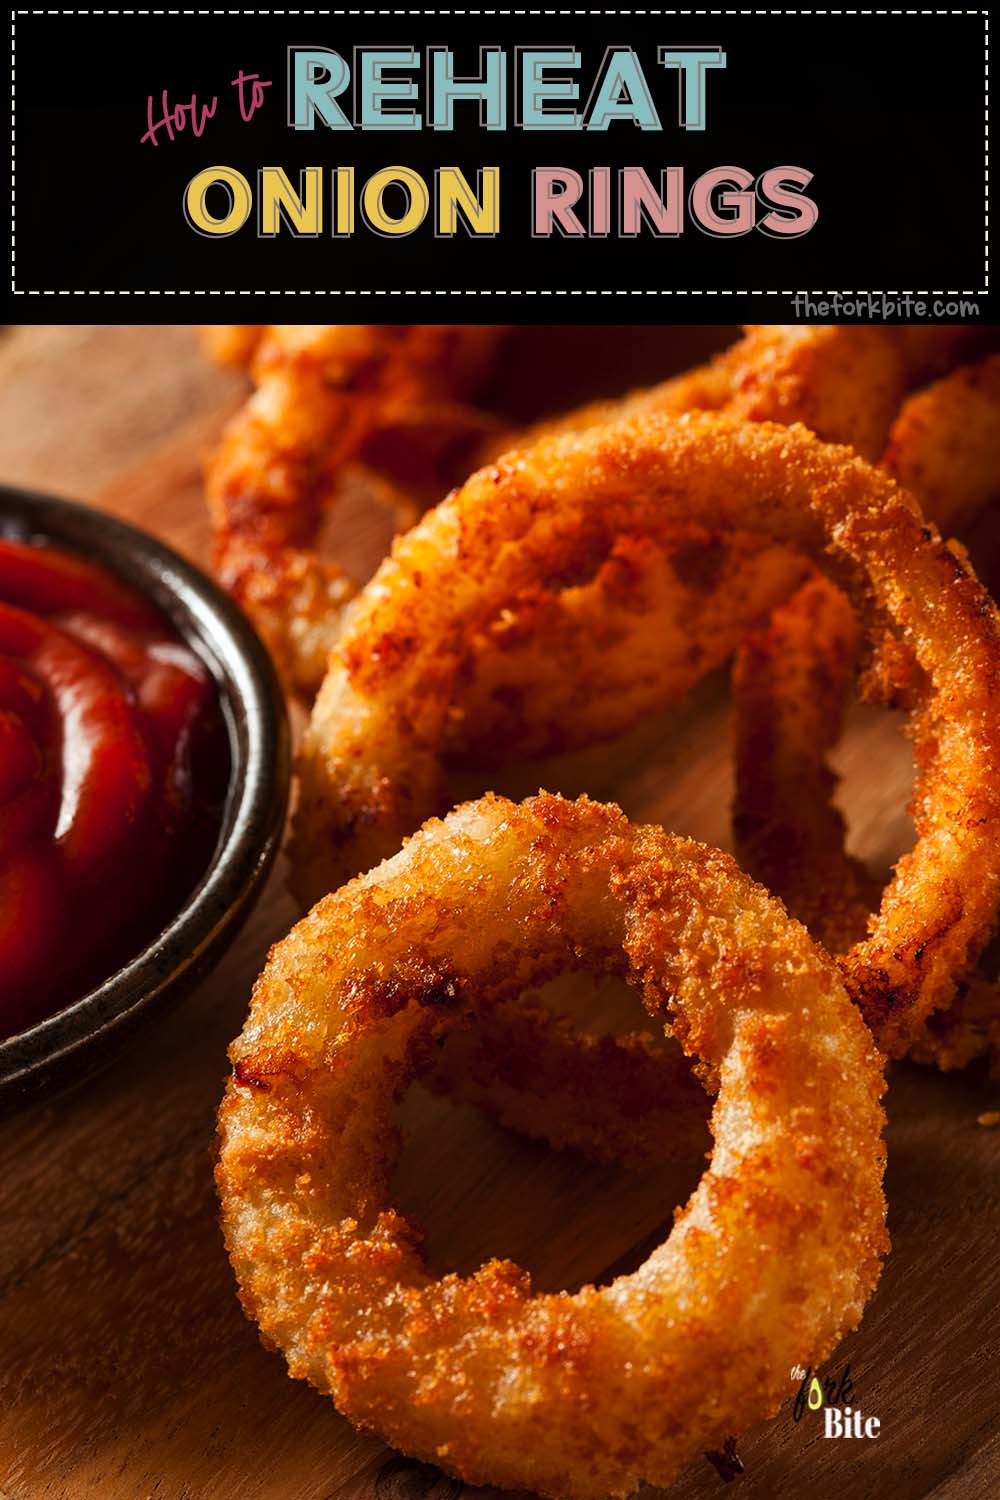 3 ways on how to reheat onion rings without losing that flavor and texture. Step by step guides to get the best out of your leftover onion rings at home